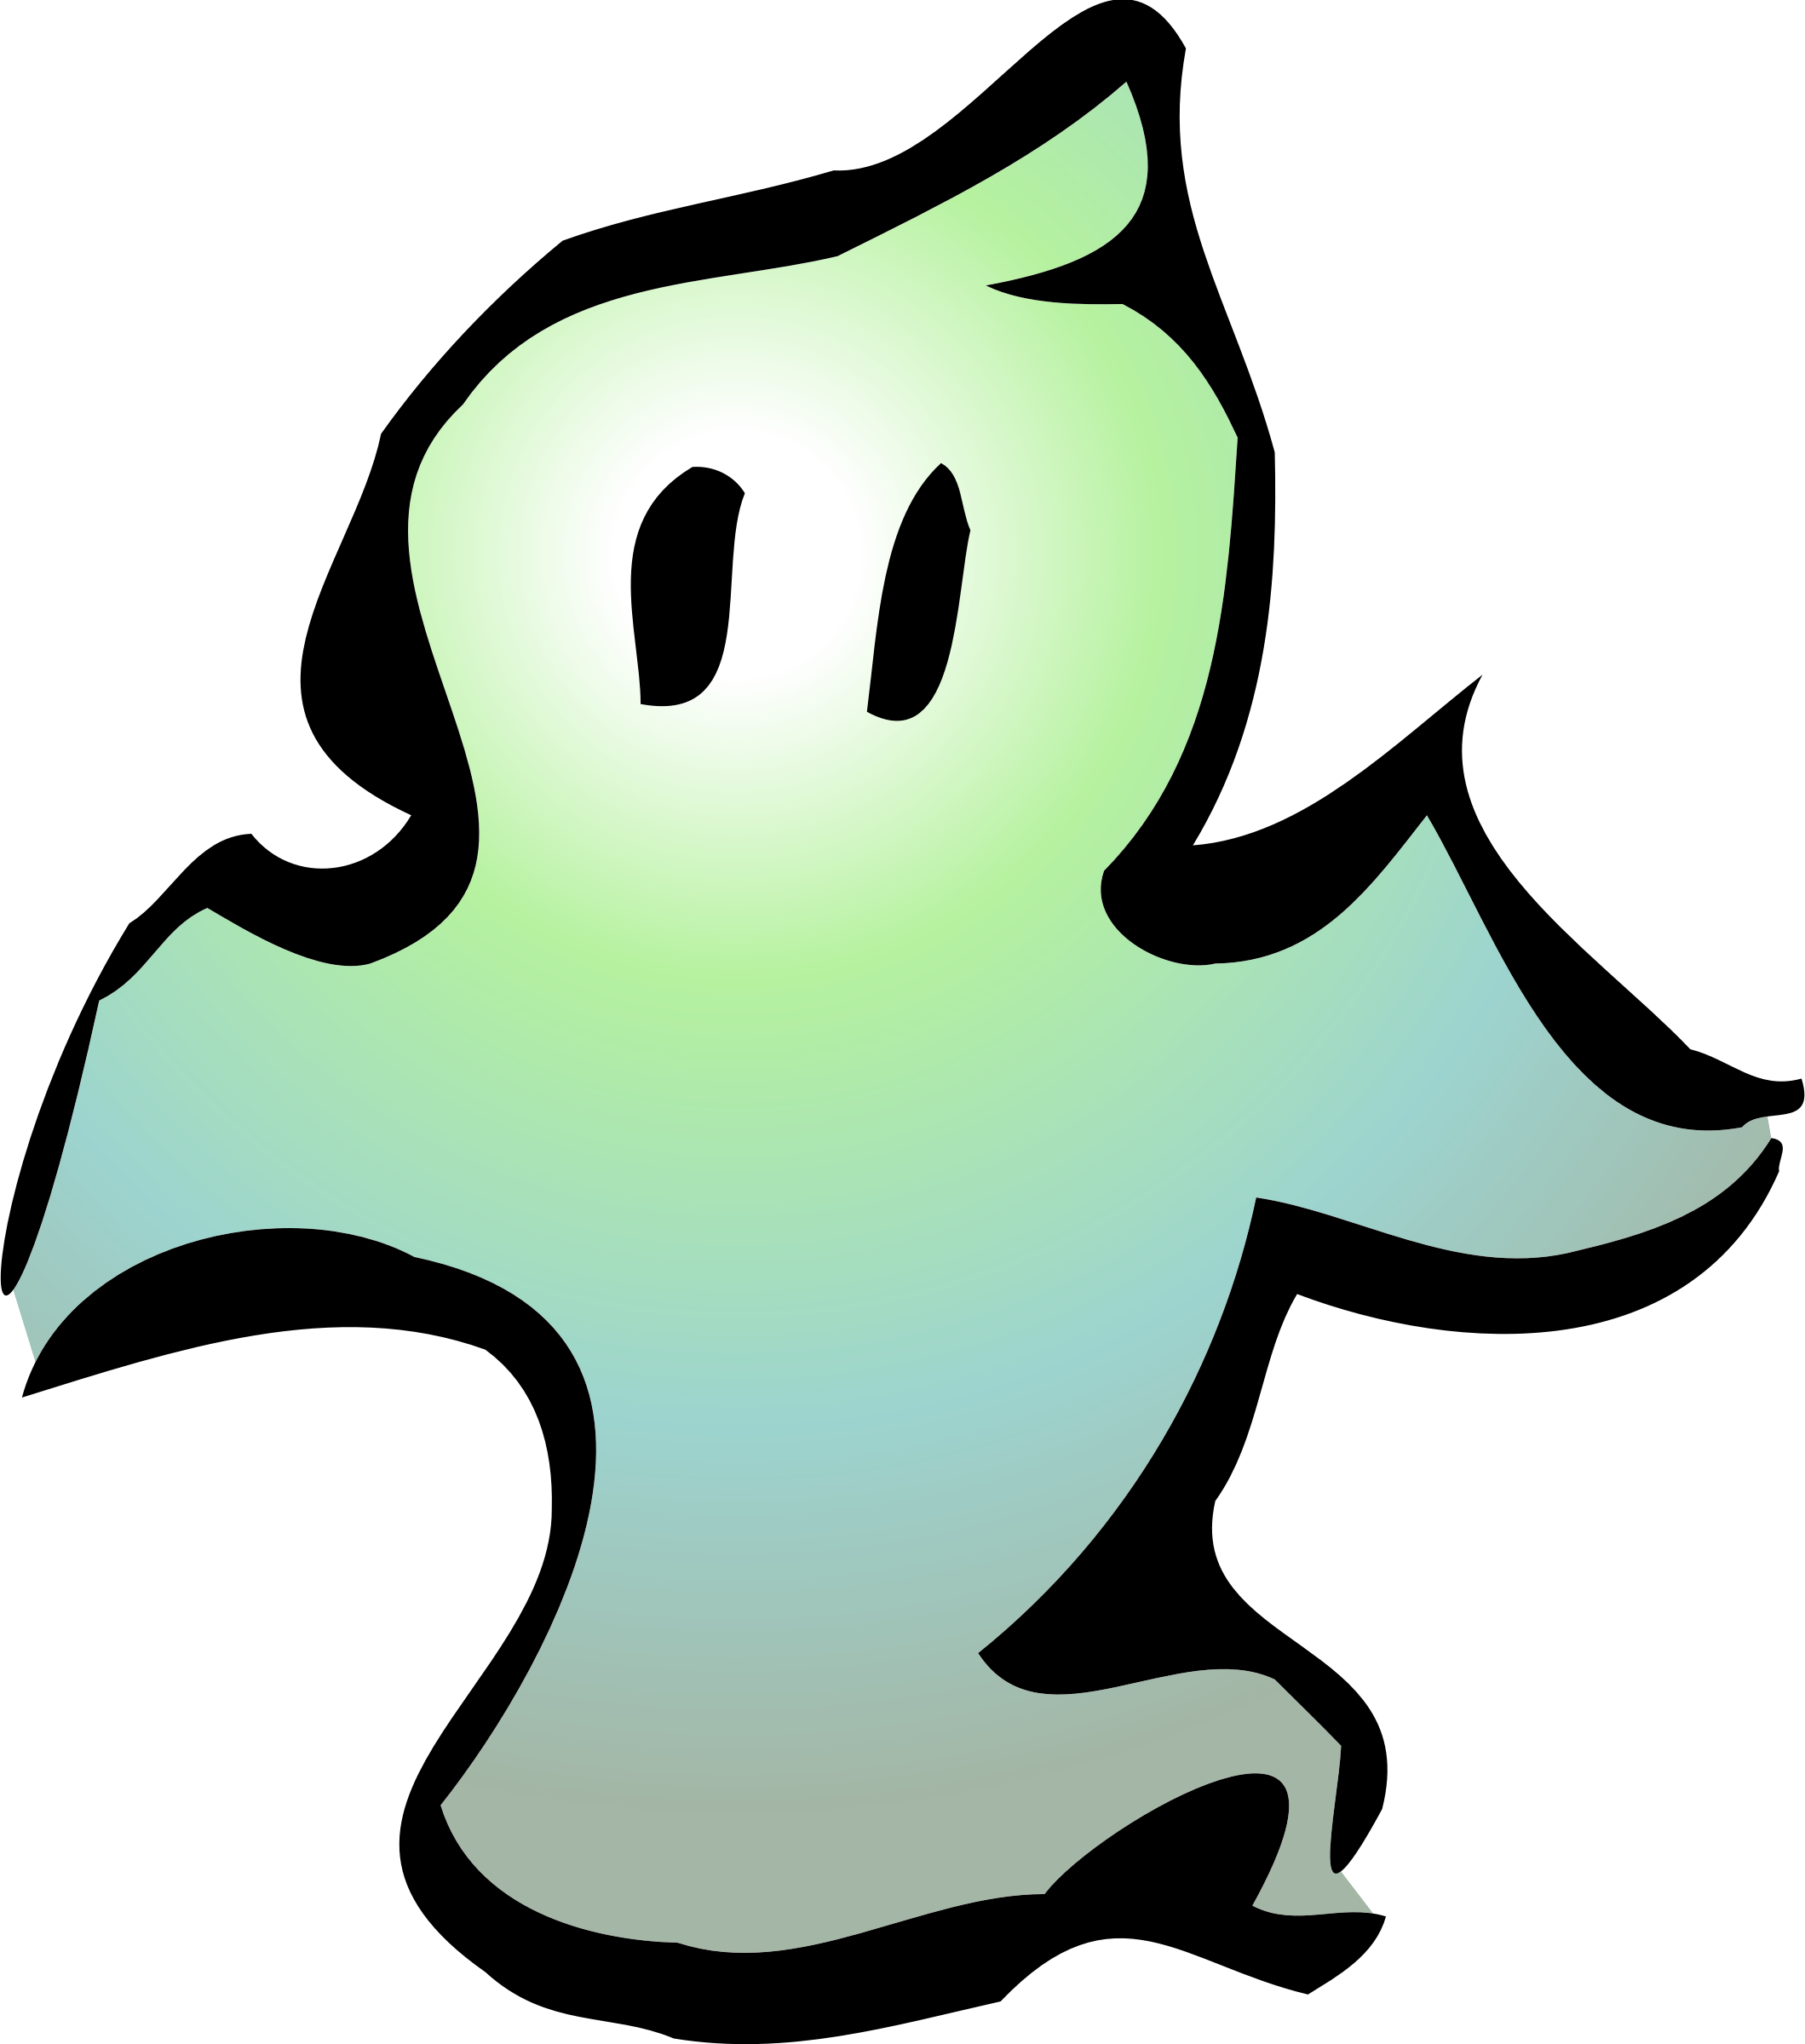 Ghost vector clipart.